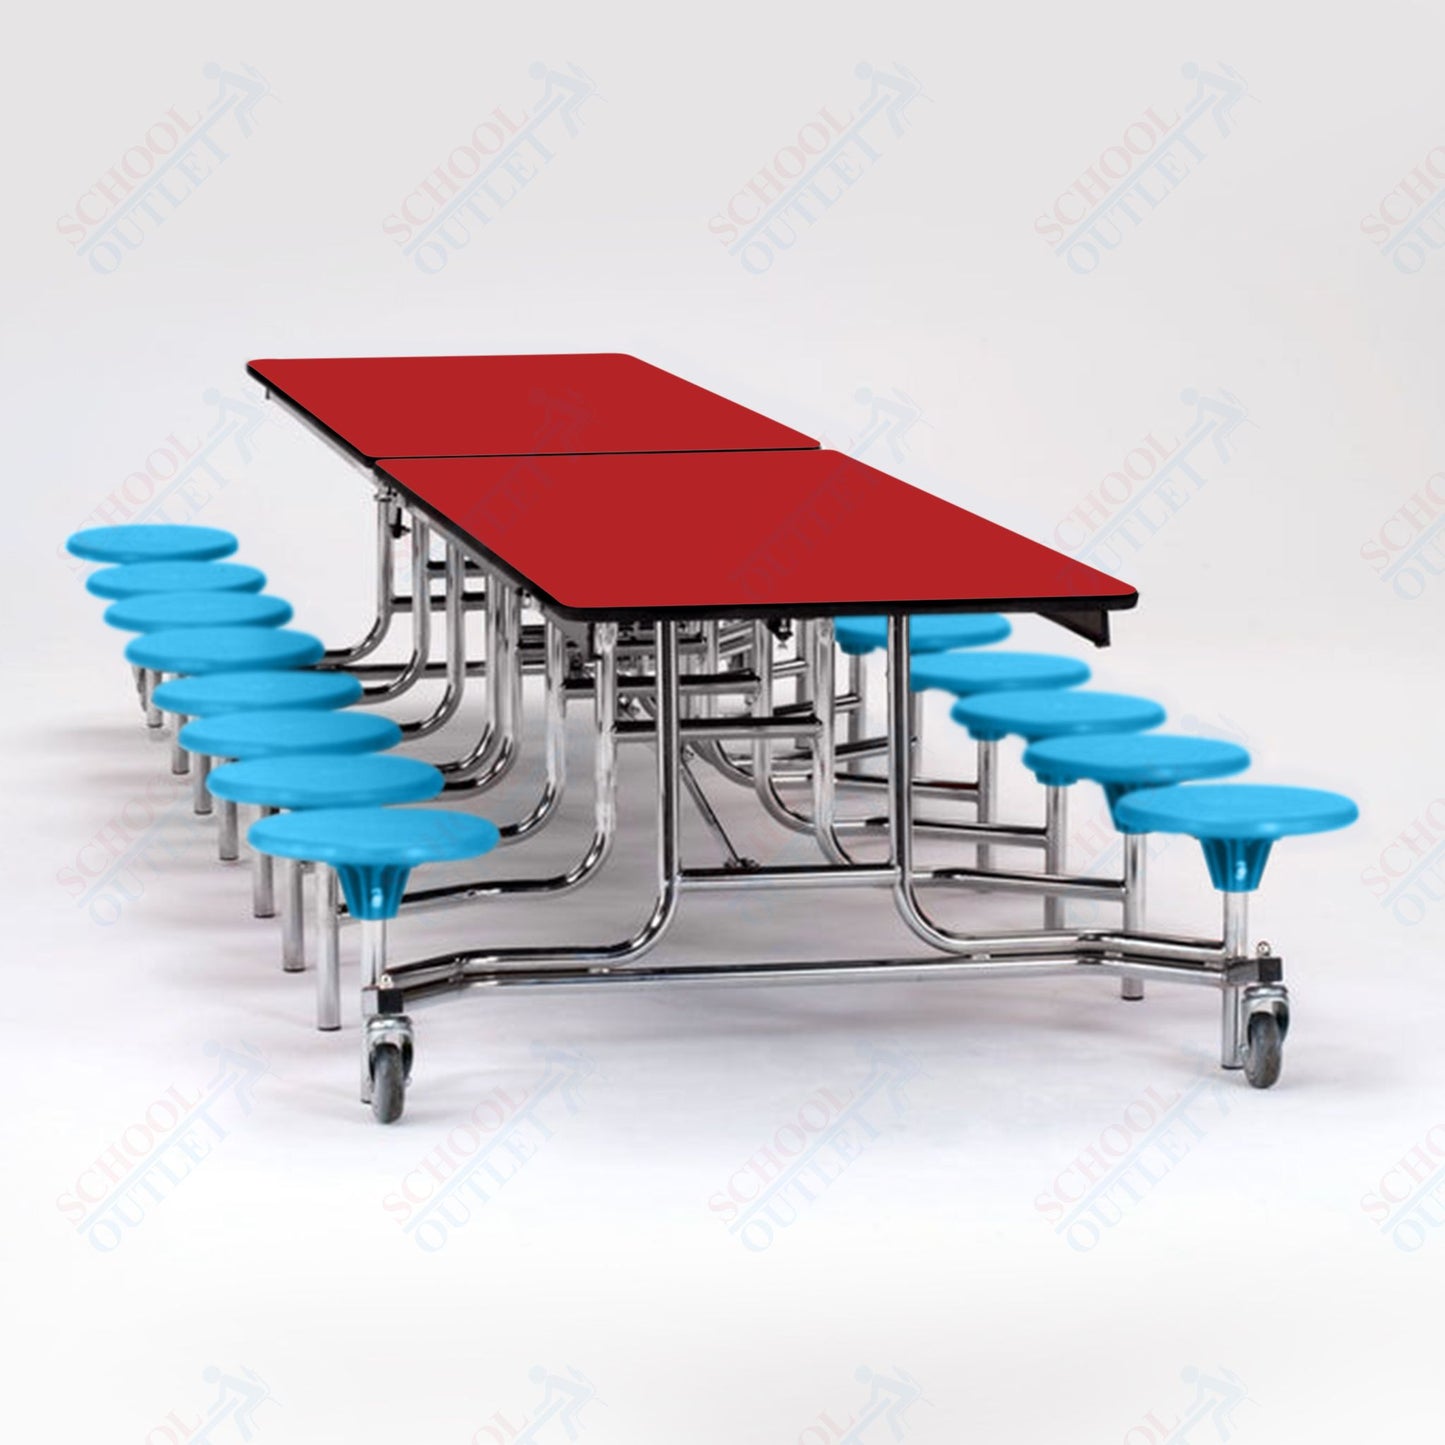 NPS Mobile Cafeteria Table - 30" W x 12' L - 16 Stools - MDF Core - Protect Edge - Chrome Frame